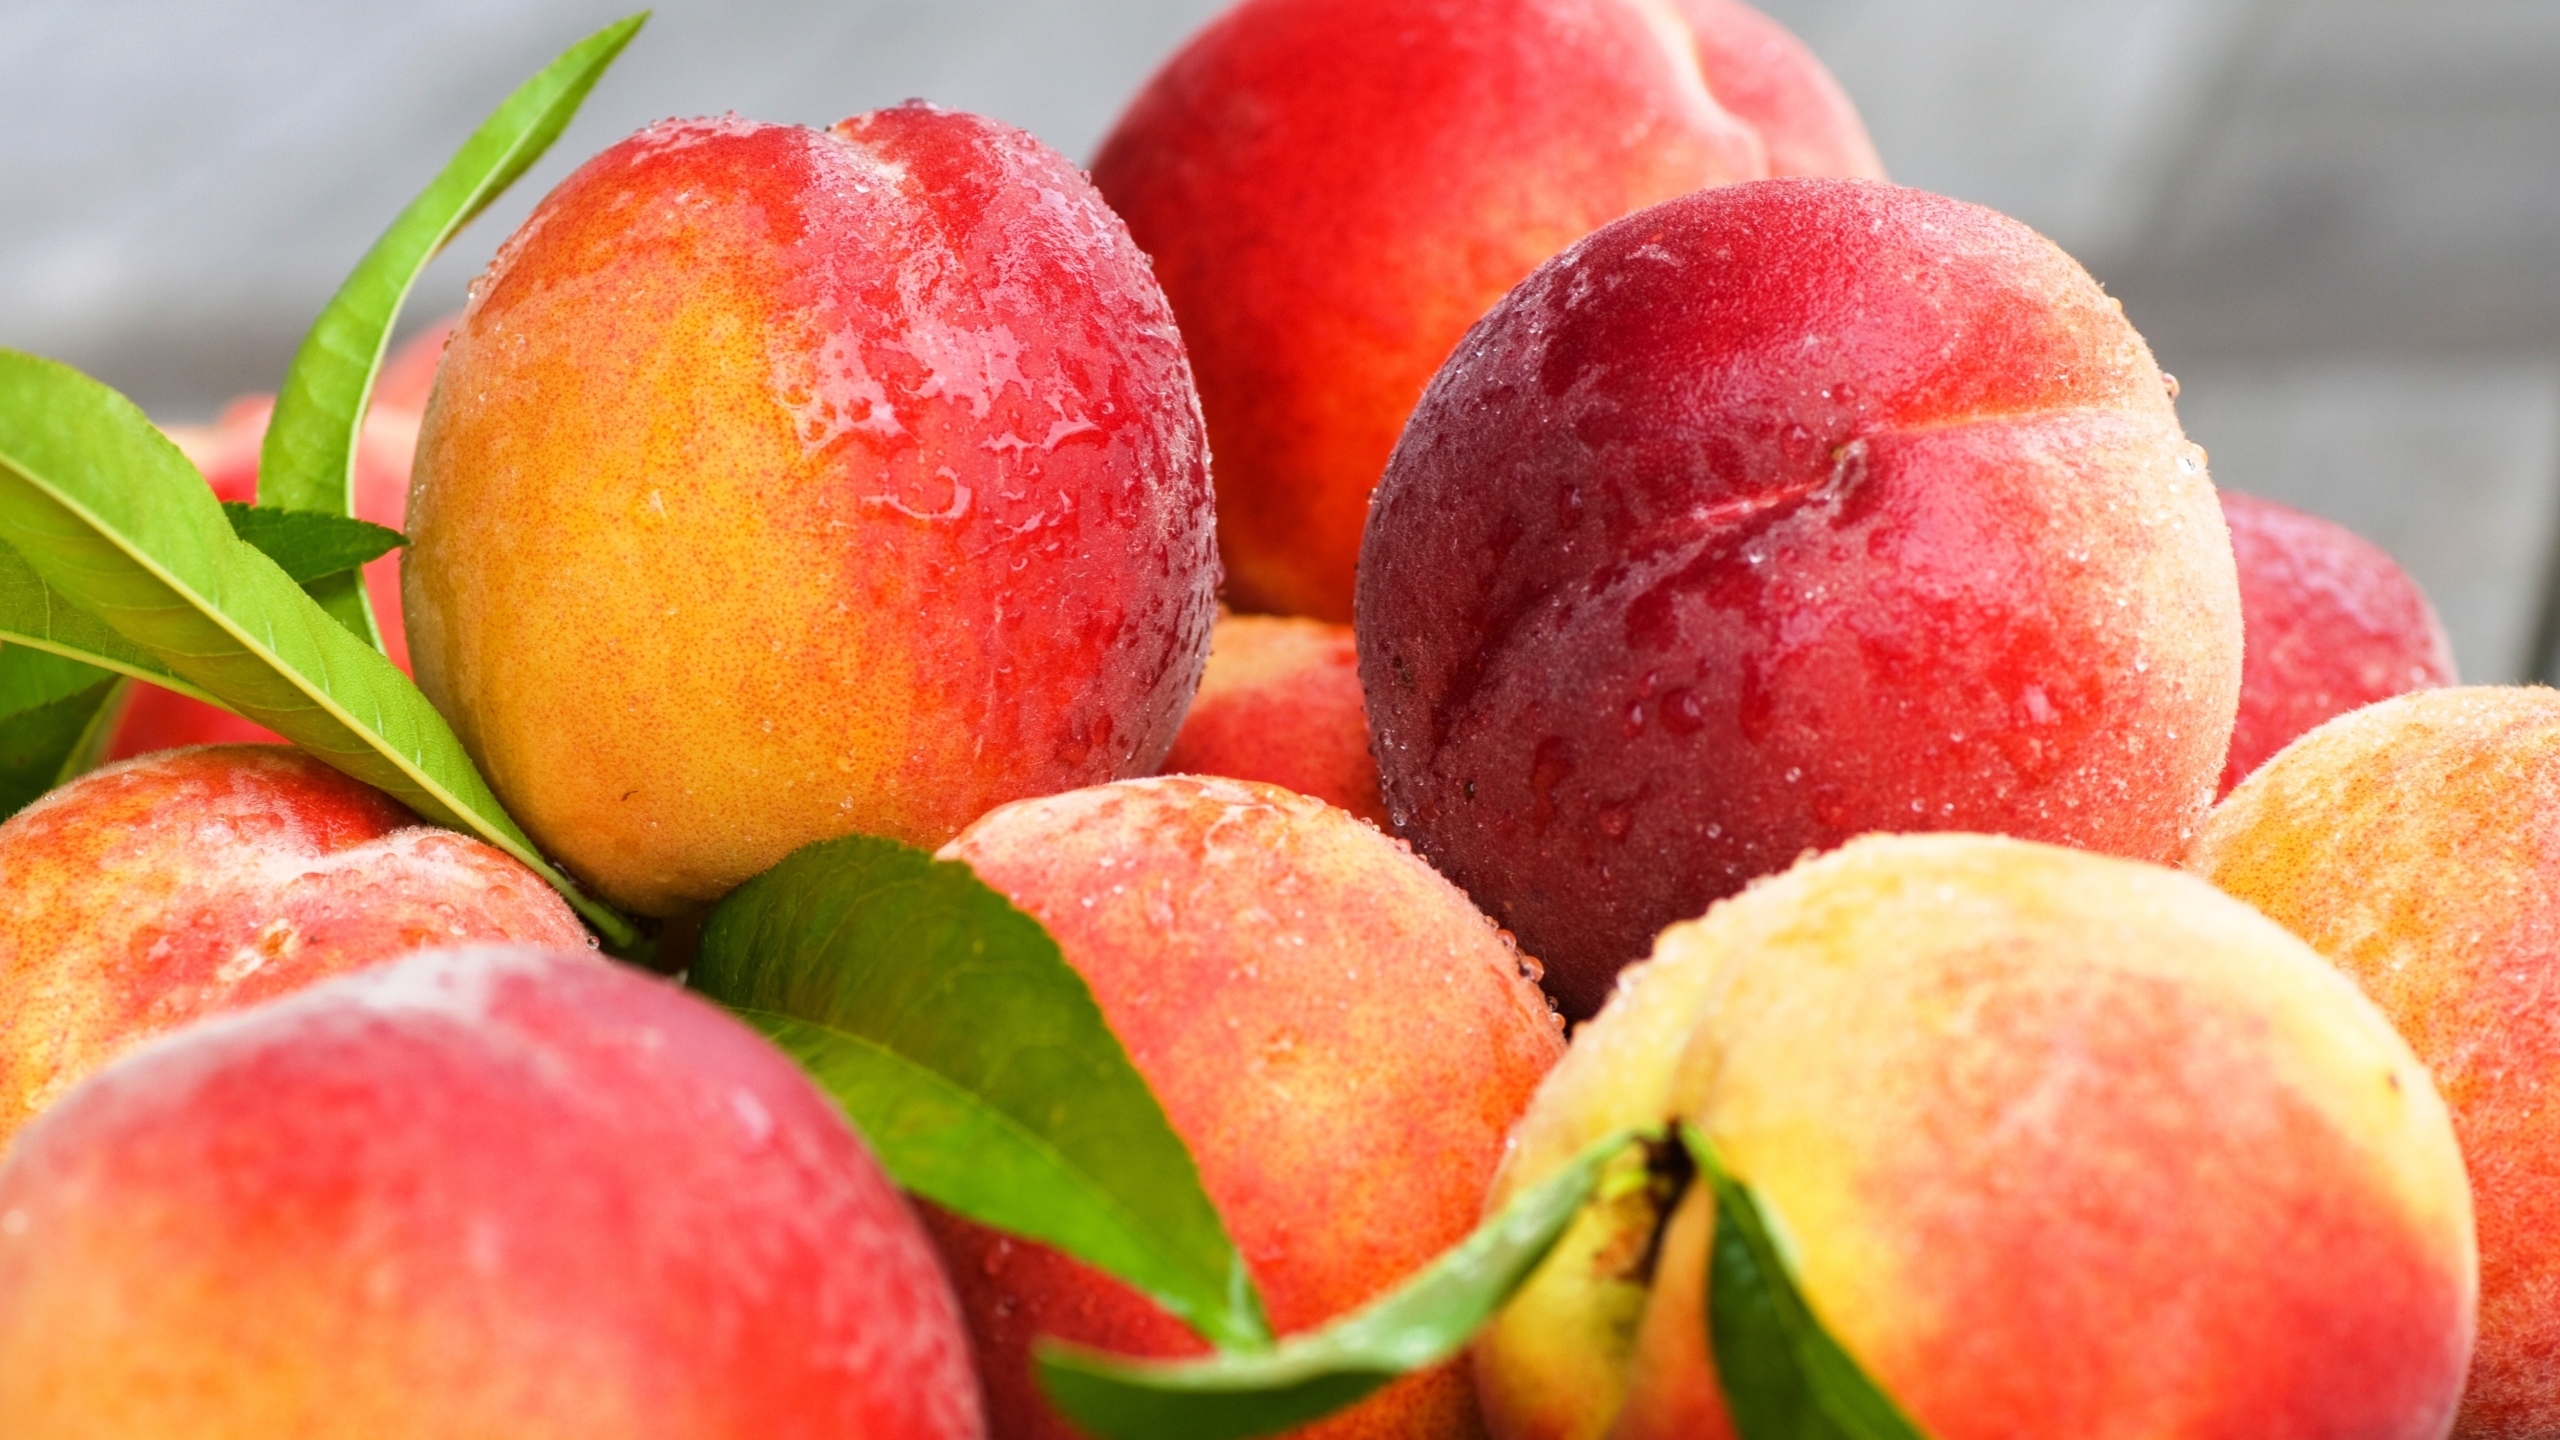 Peaches Nectarines Leaves 1440p Resolution Wallpaper